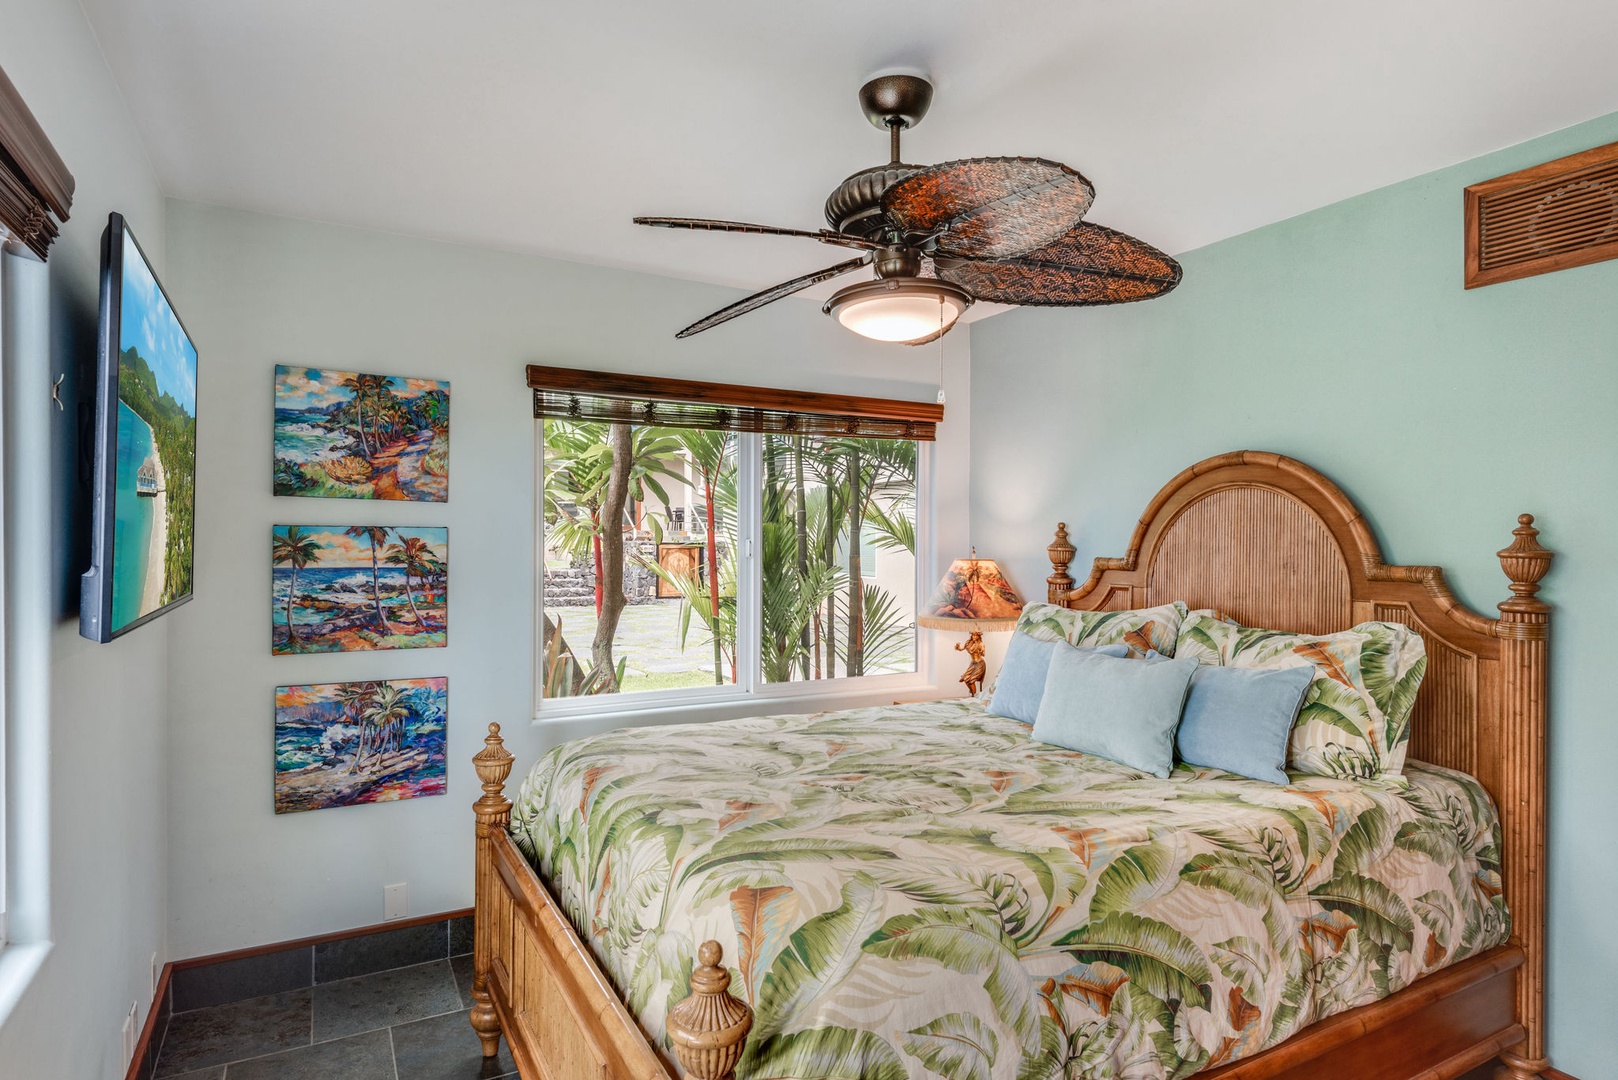 Kailua Kona Vacation Rentals, Kona Beach Bungalows** - Discover comfort and tranquility in Moana Hale's Downstairs Queen Bedroom 2, a perfect retreat for relaxation.